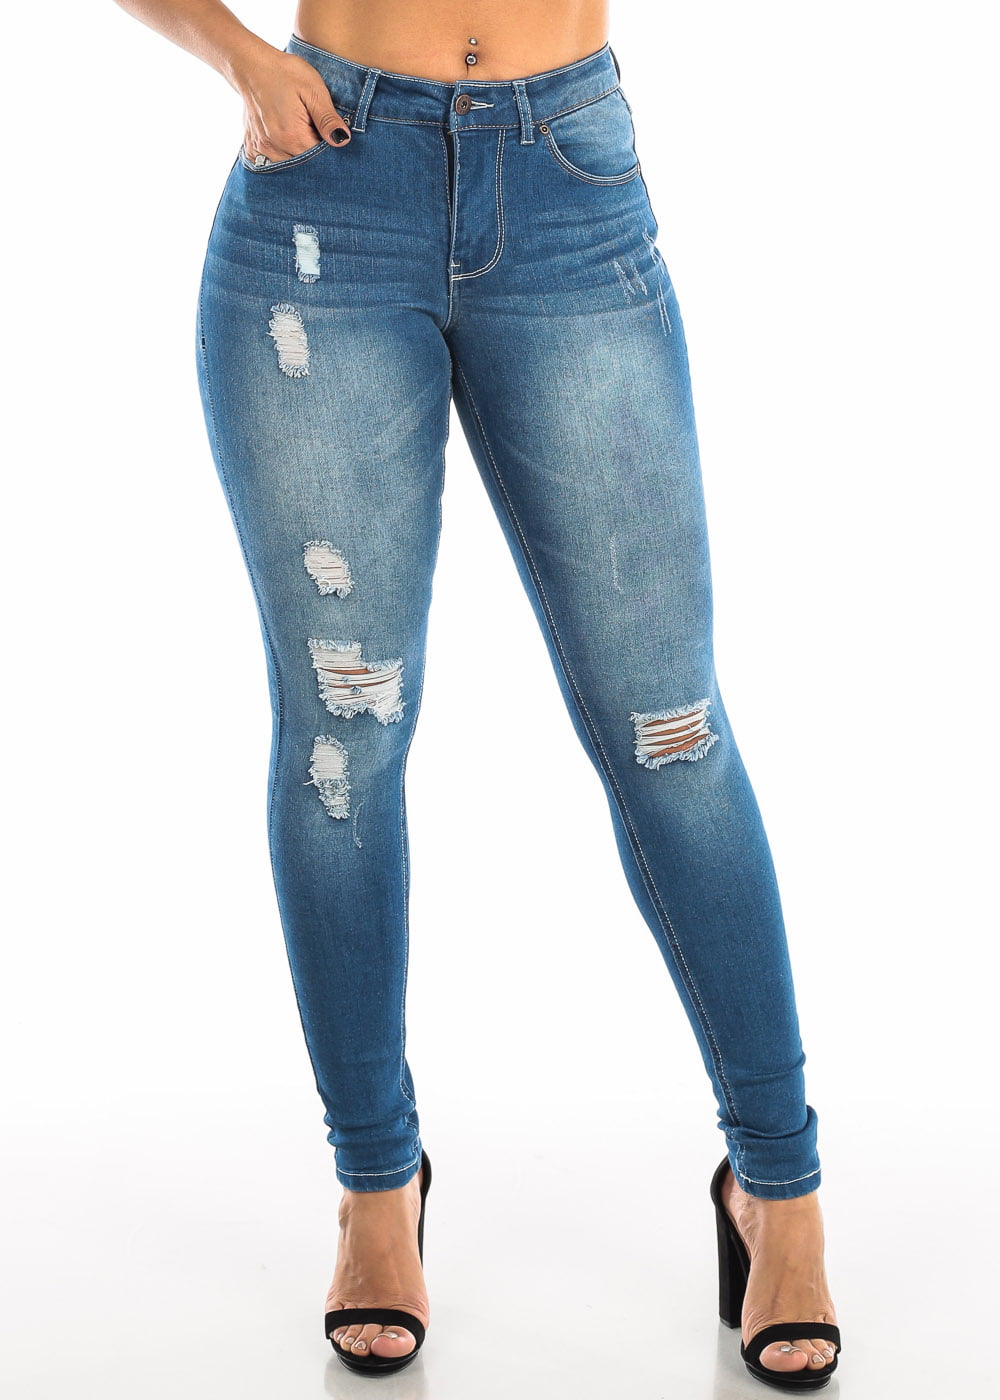 Moda Xpress - Womens Skinny Jeans High Waisted Torn Distressed Ripped ...